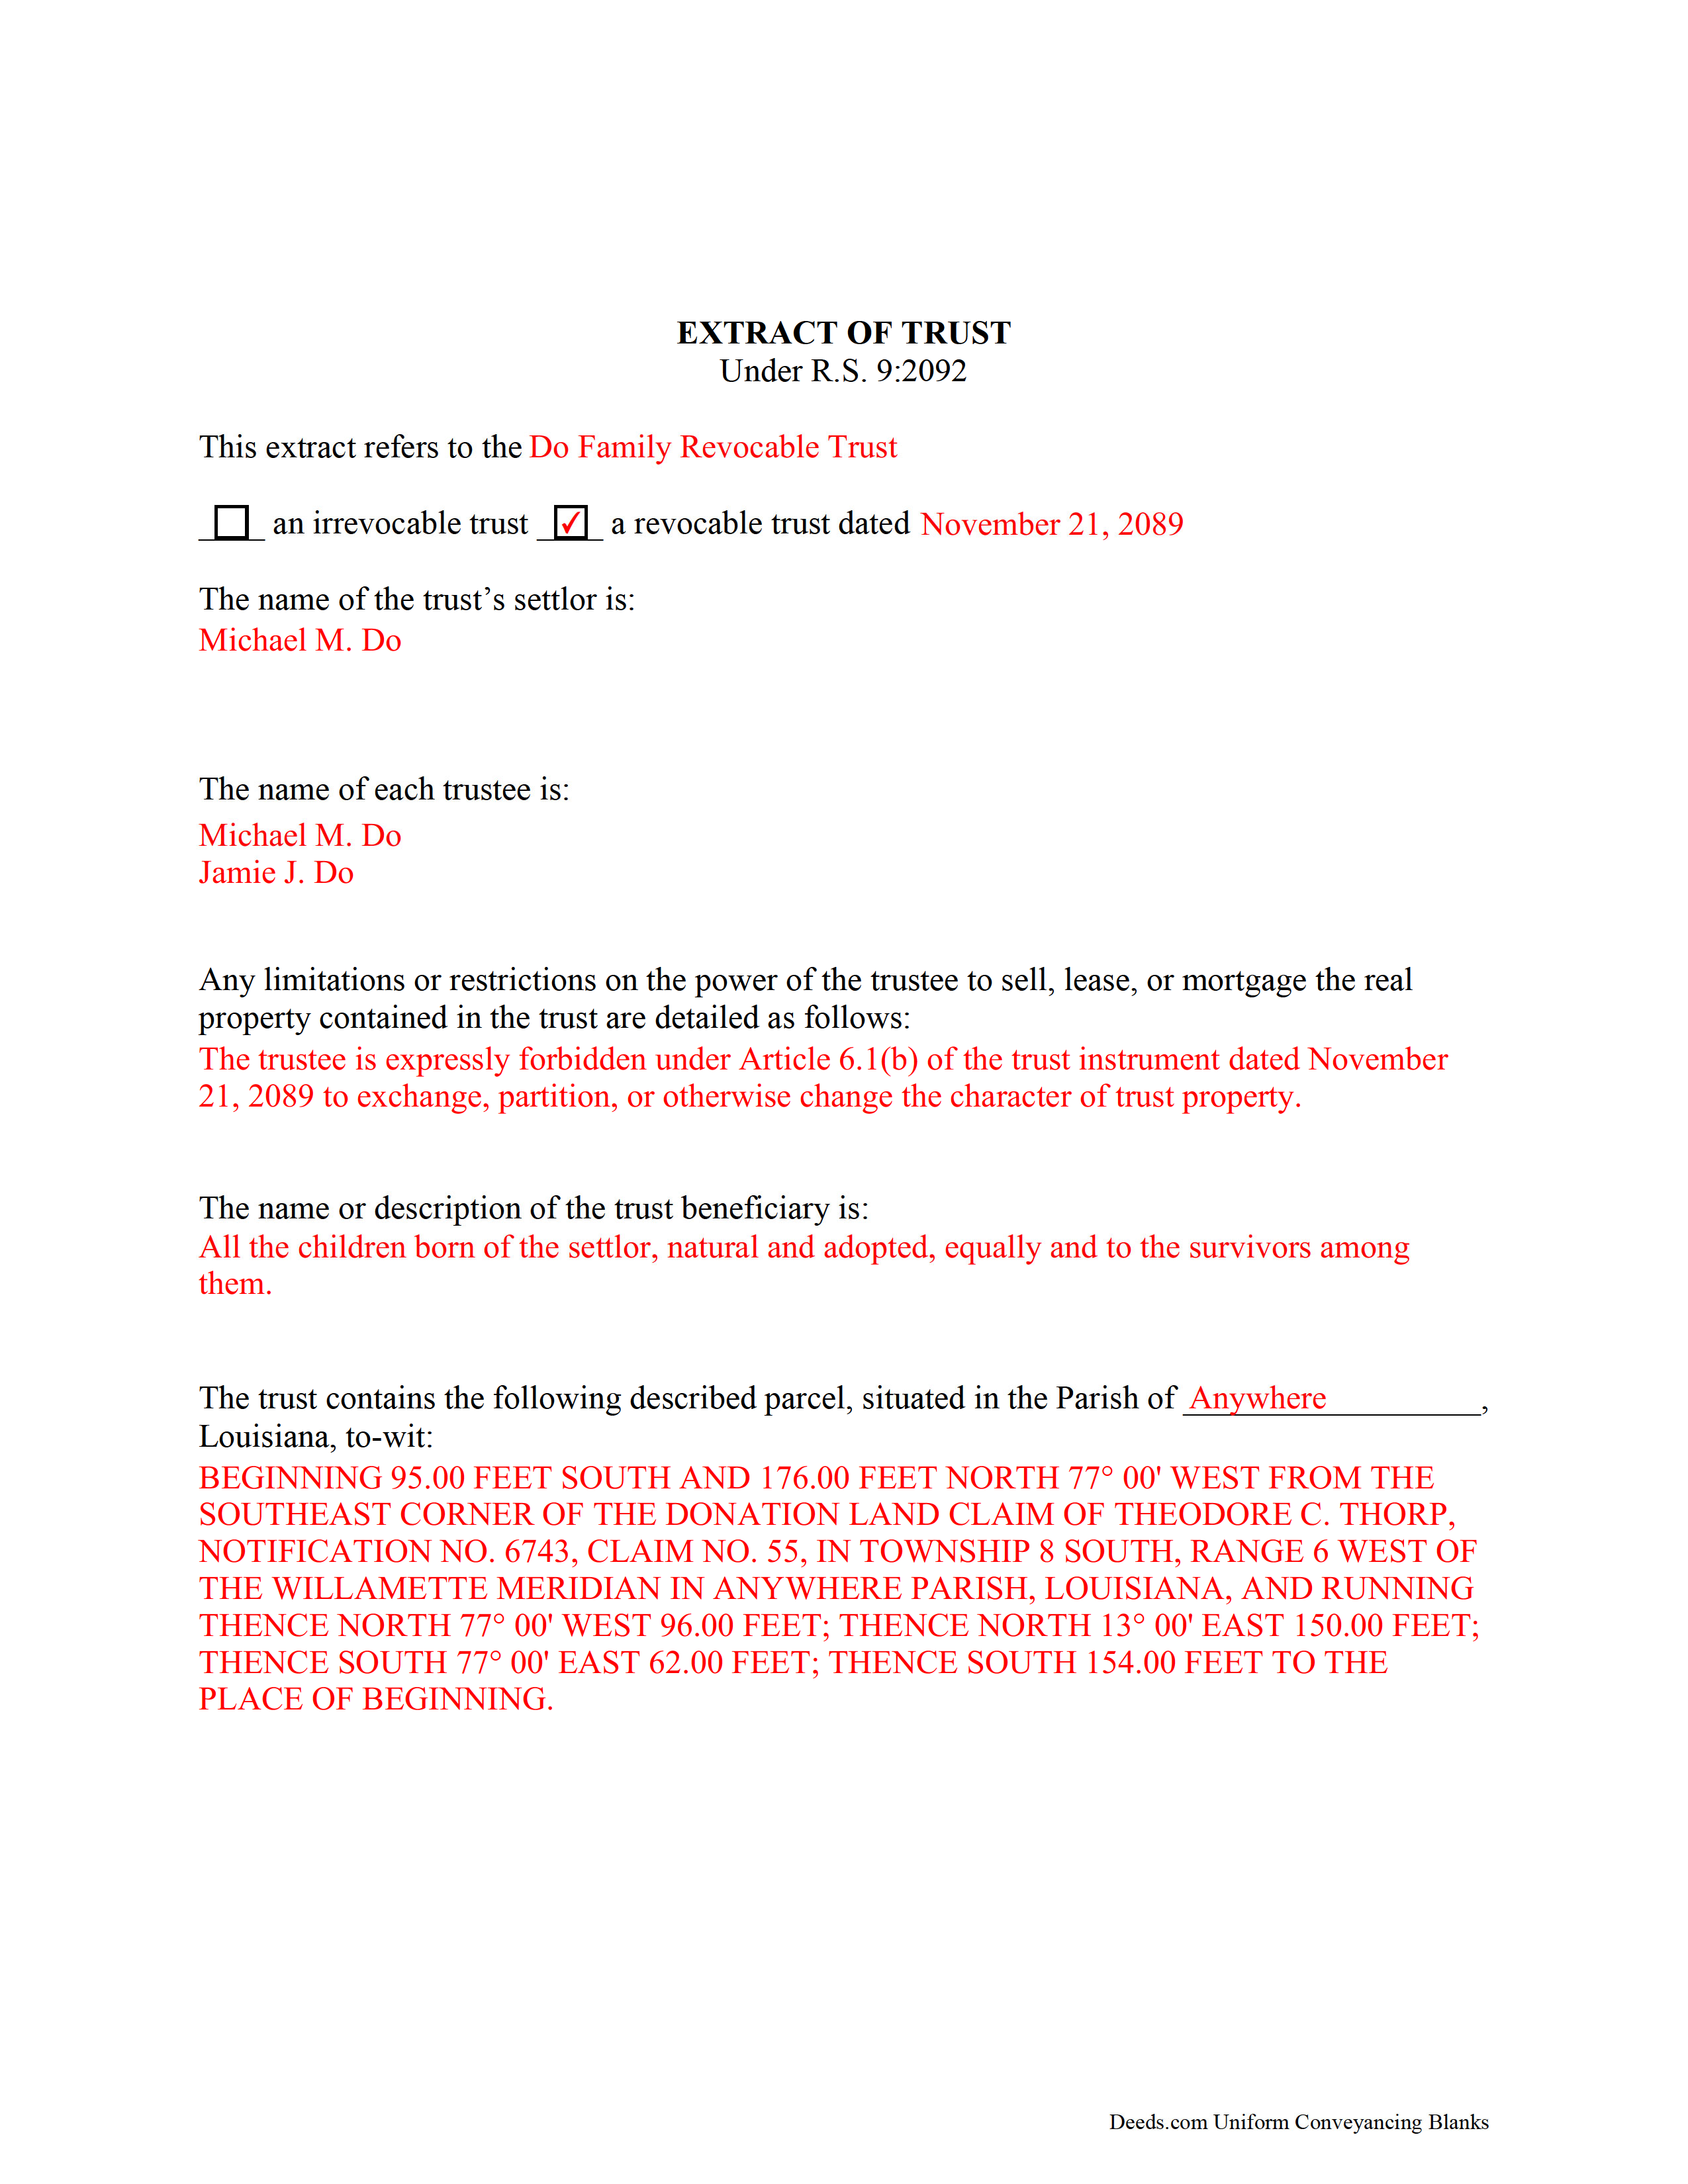 Completed Example of the Extract of Trust Document